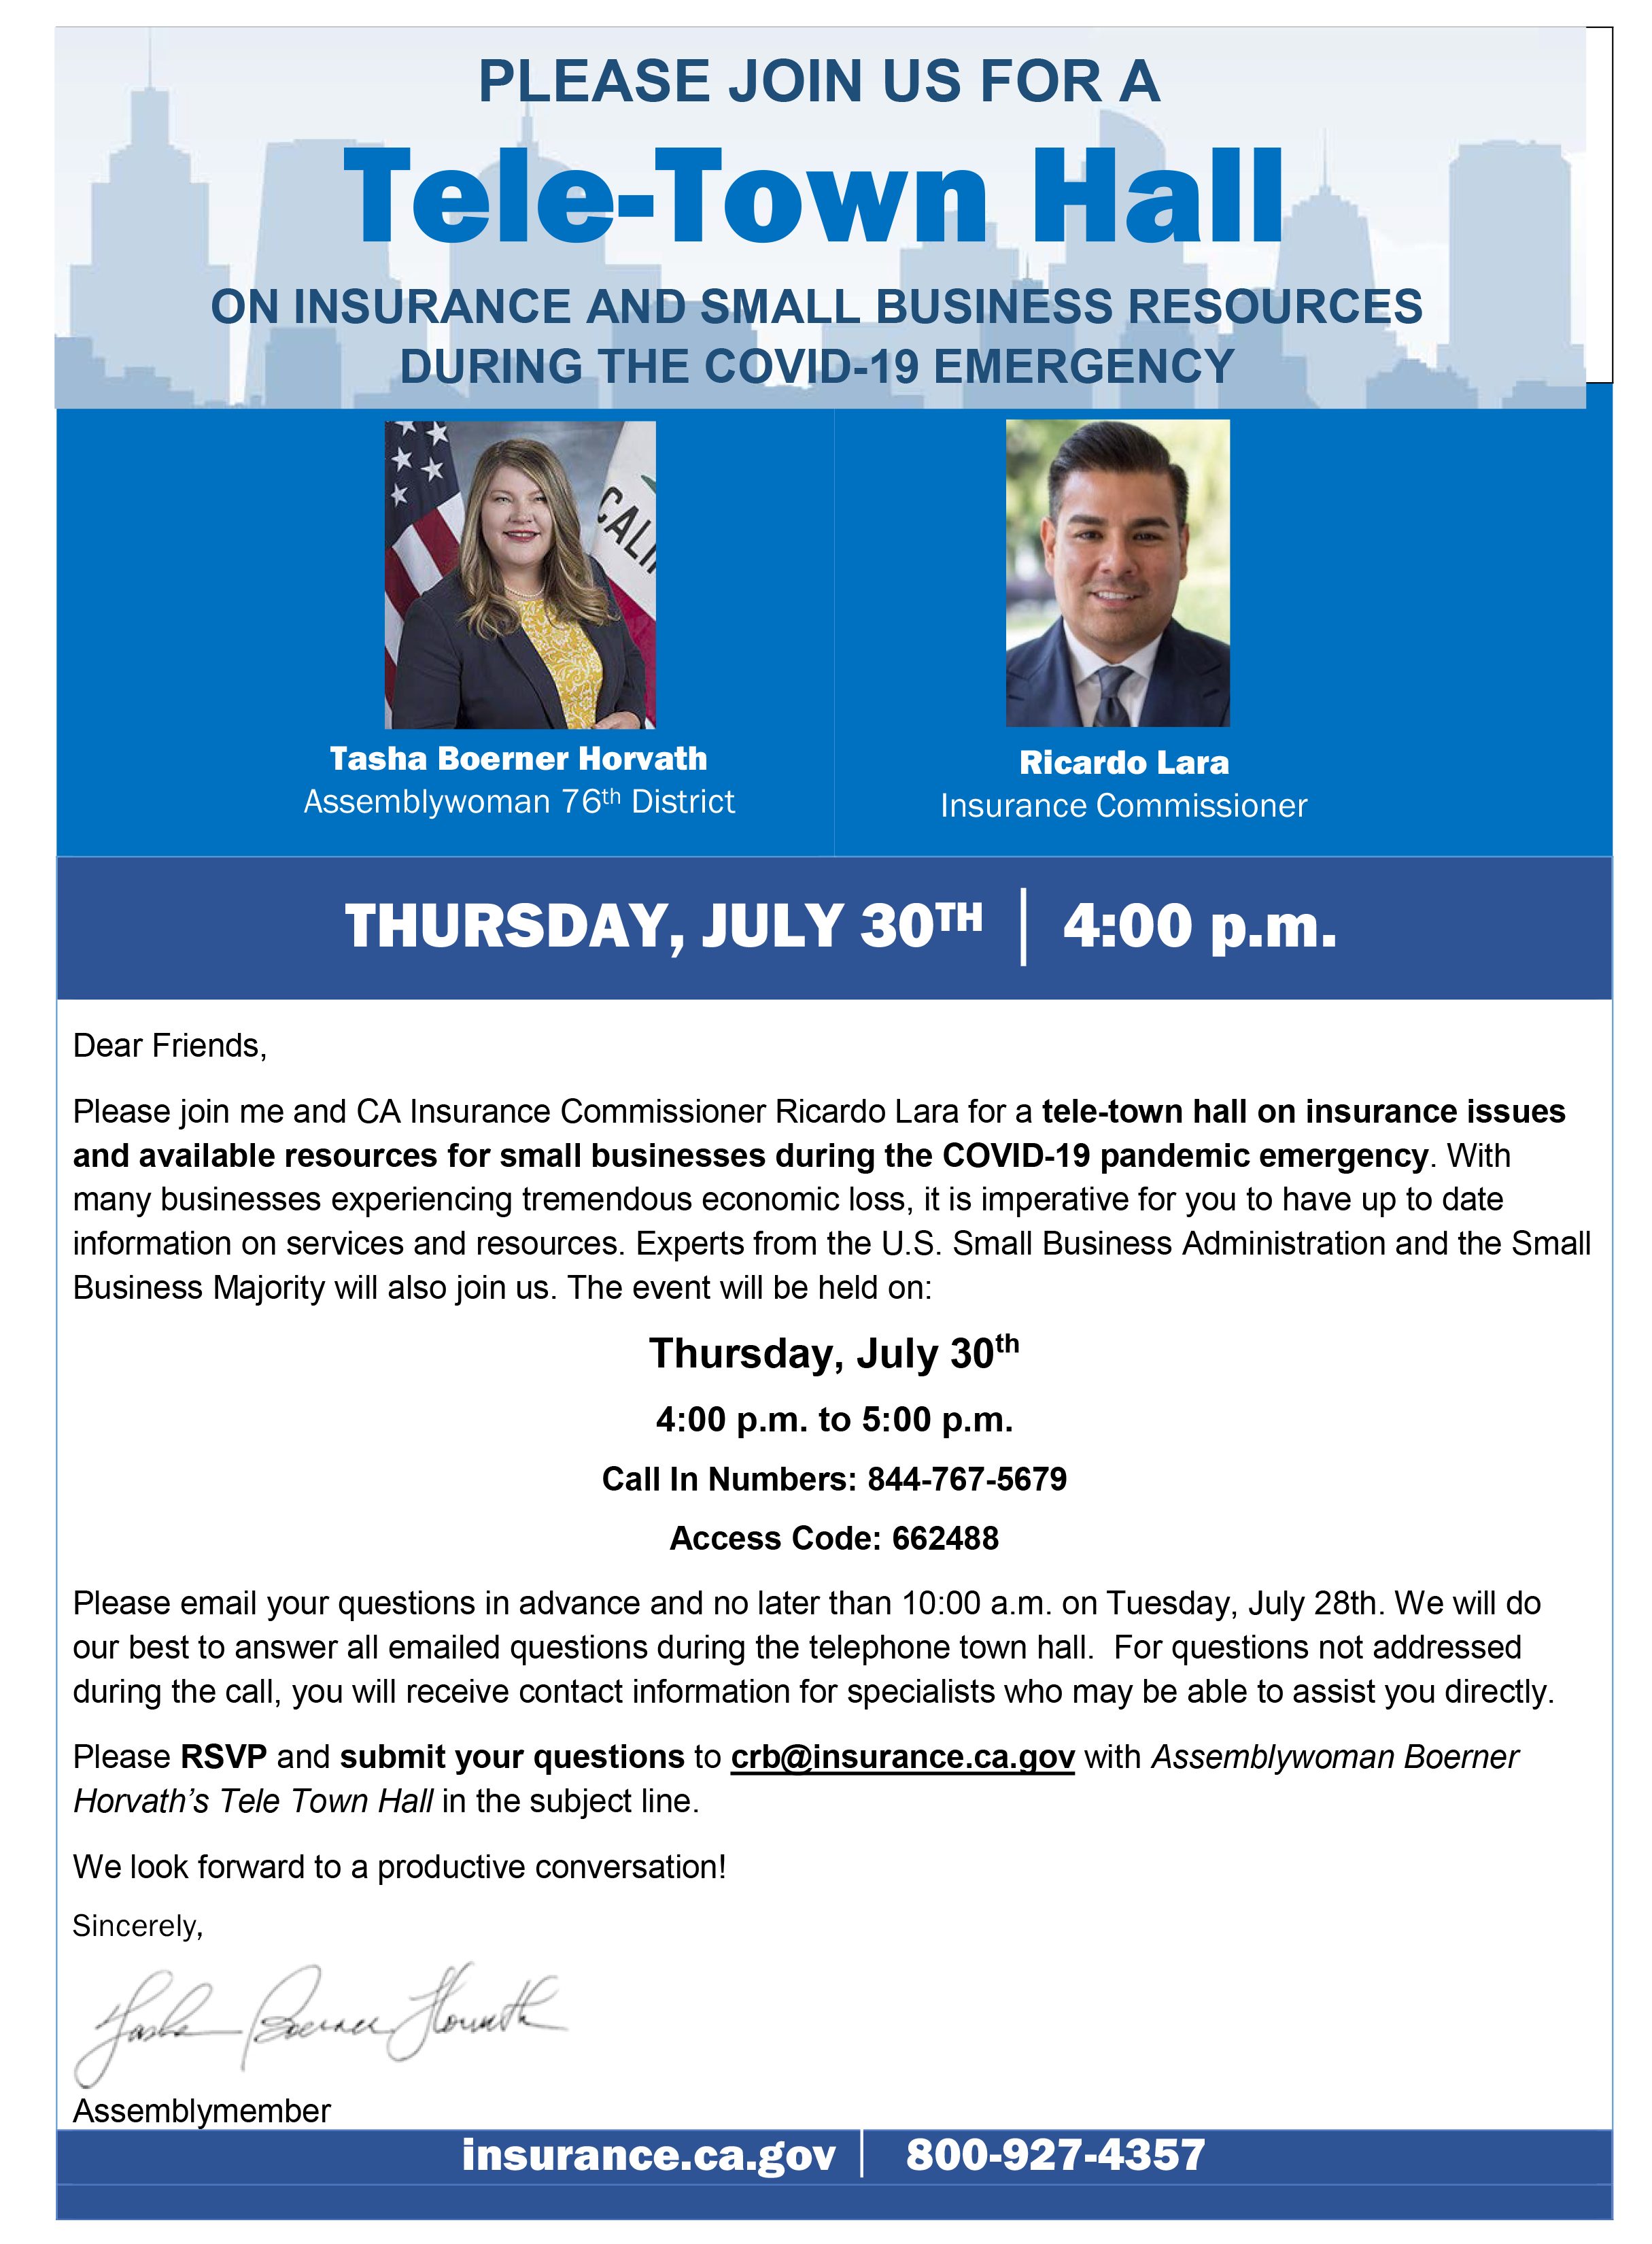 Please join us. The event will be held on Thursday, July 30th, 4:00 p.m. to 5:00 p.m., Call In Numbers: 844-767-5679, Access Code: 662488